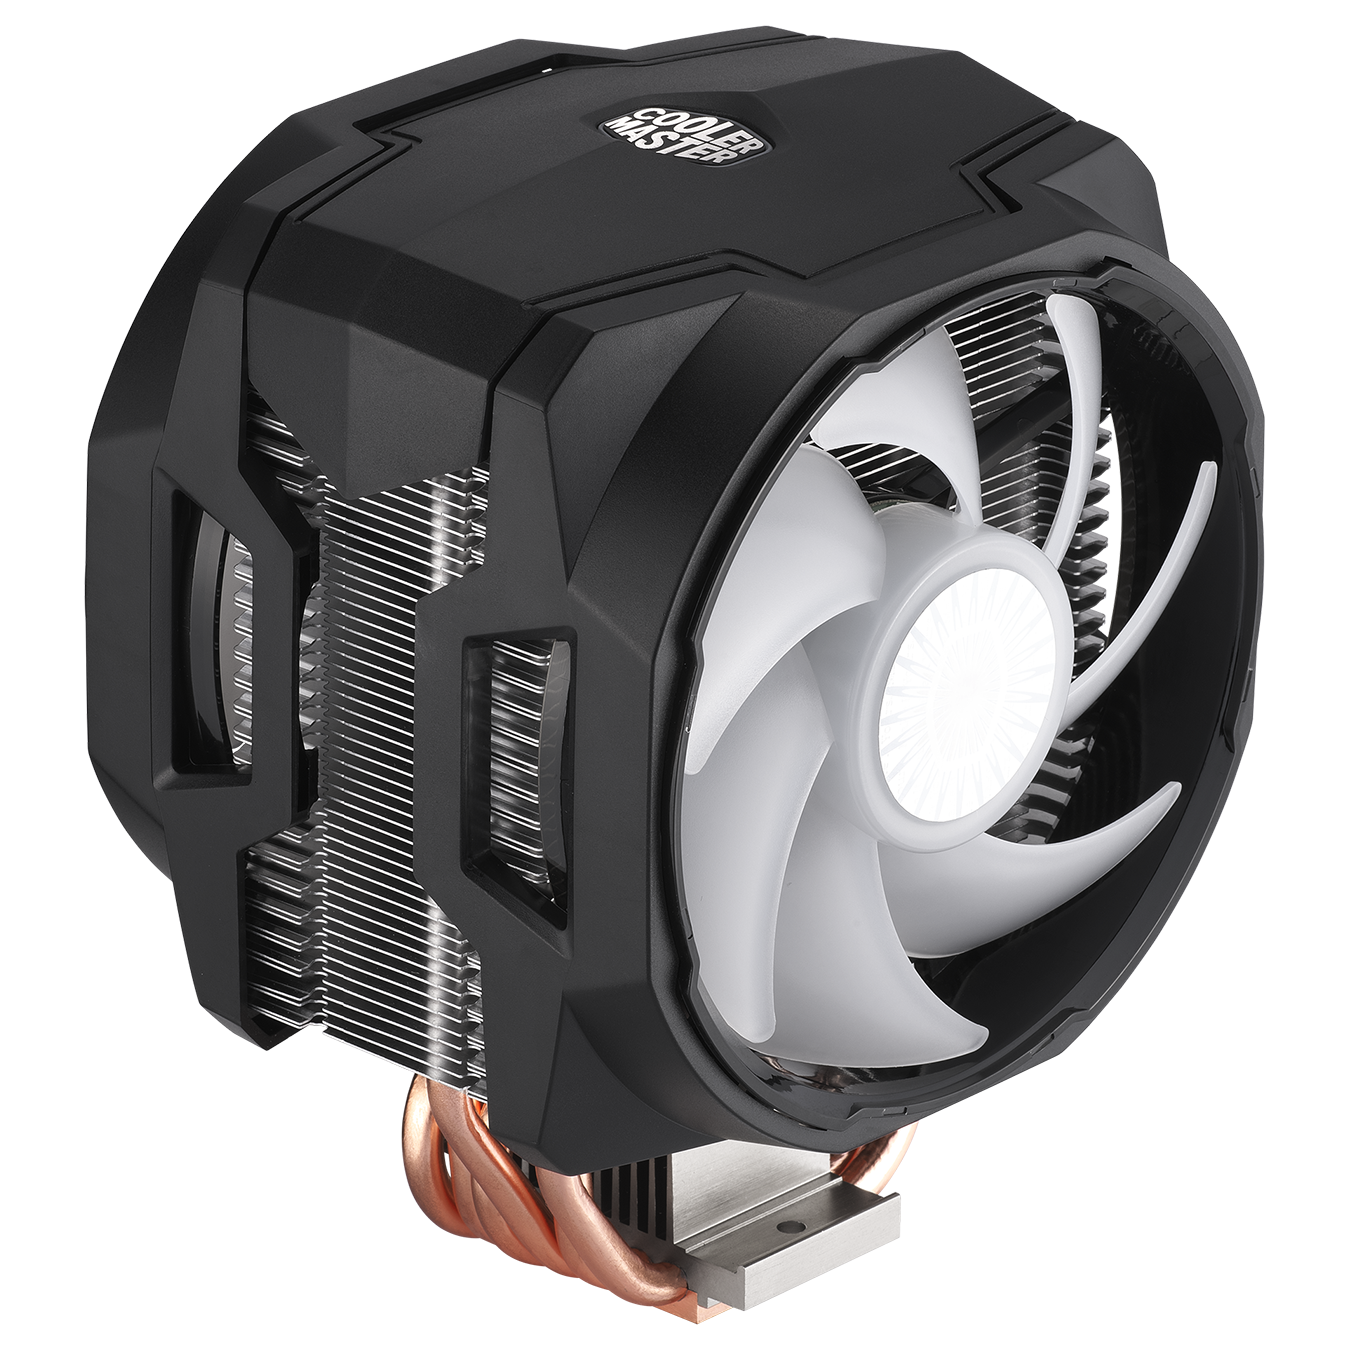 With twin SickleFlow 120 ARGB fans, the cooler effortlessly eliminates heat using its Push-Pull configuration